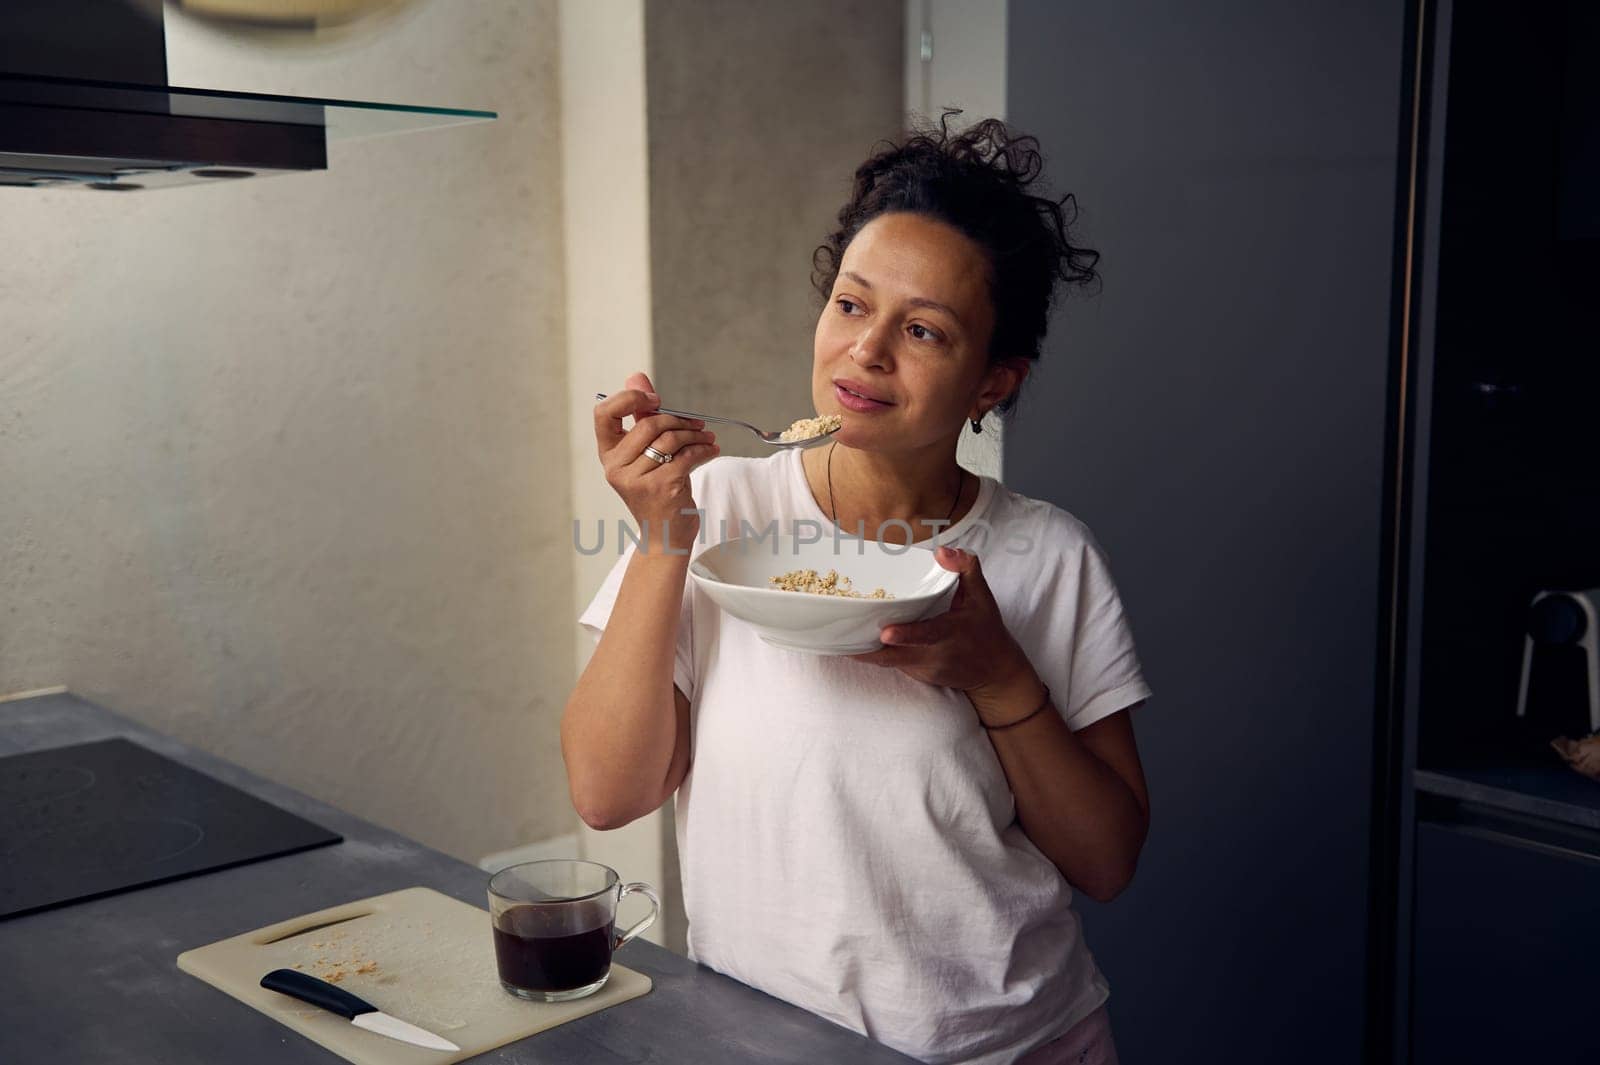 Young pretty woman in white t-shirt, eating a bowl of muesli at home. People. Food consumerism. Diet and slimming concept. Healthy lifestyle